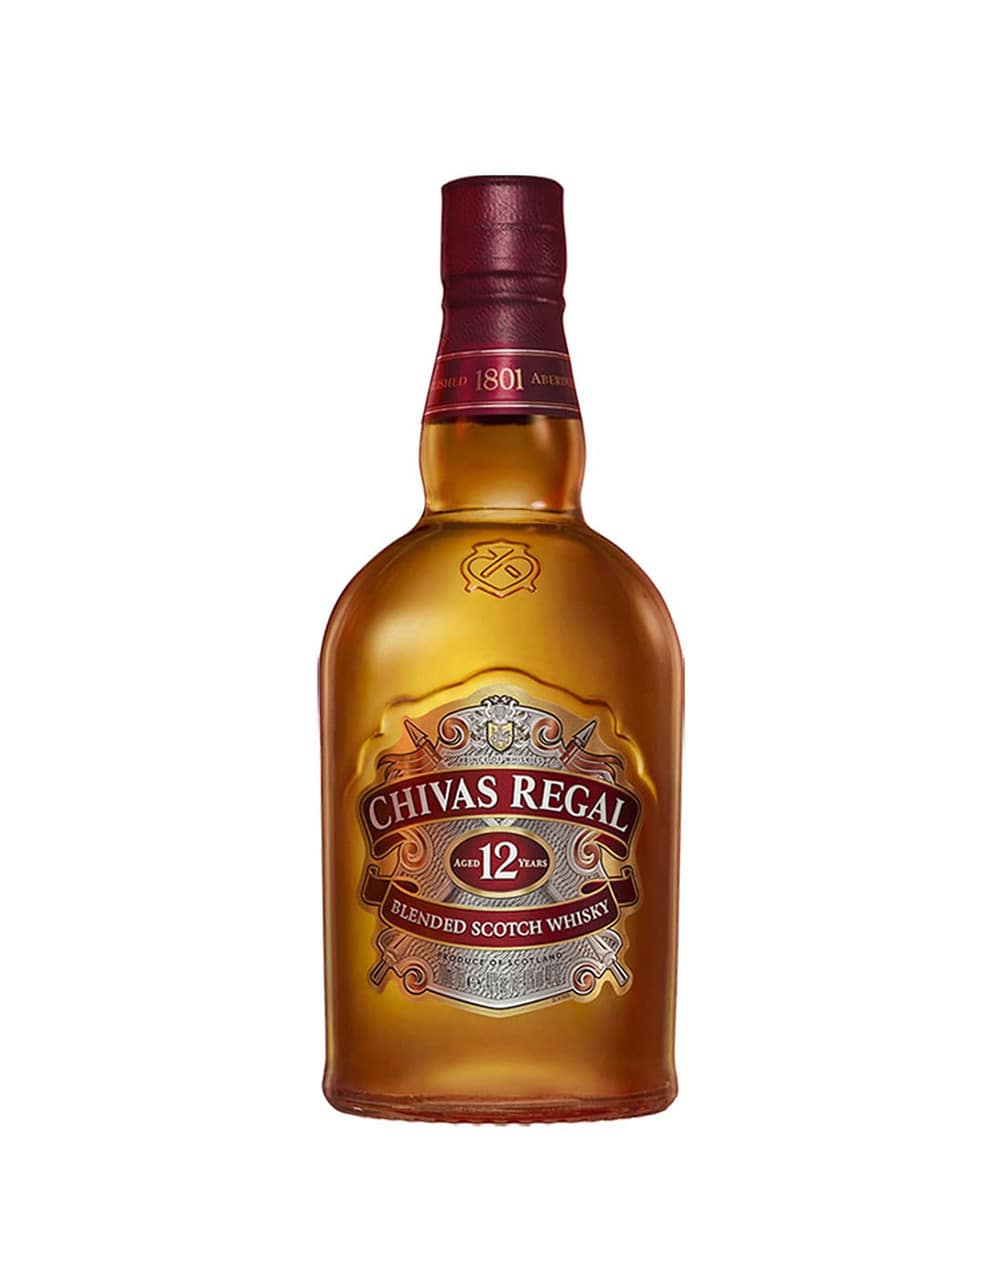 BUY] Chivas Regal 12 Year Old Blended Scotch Whisky